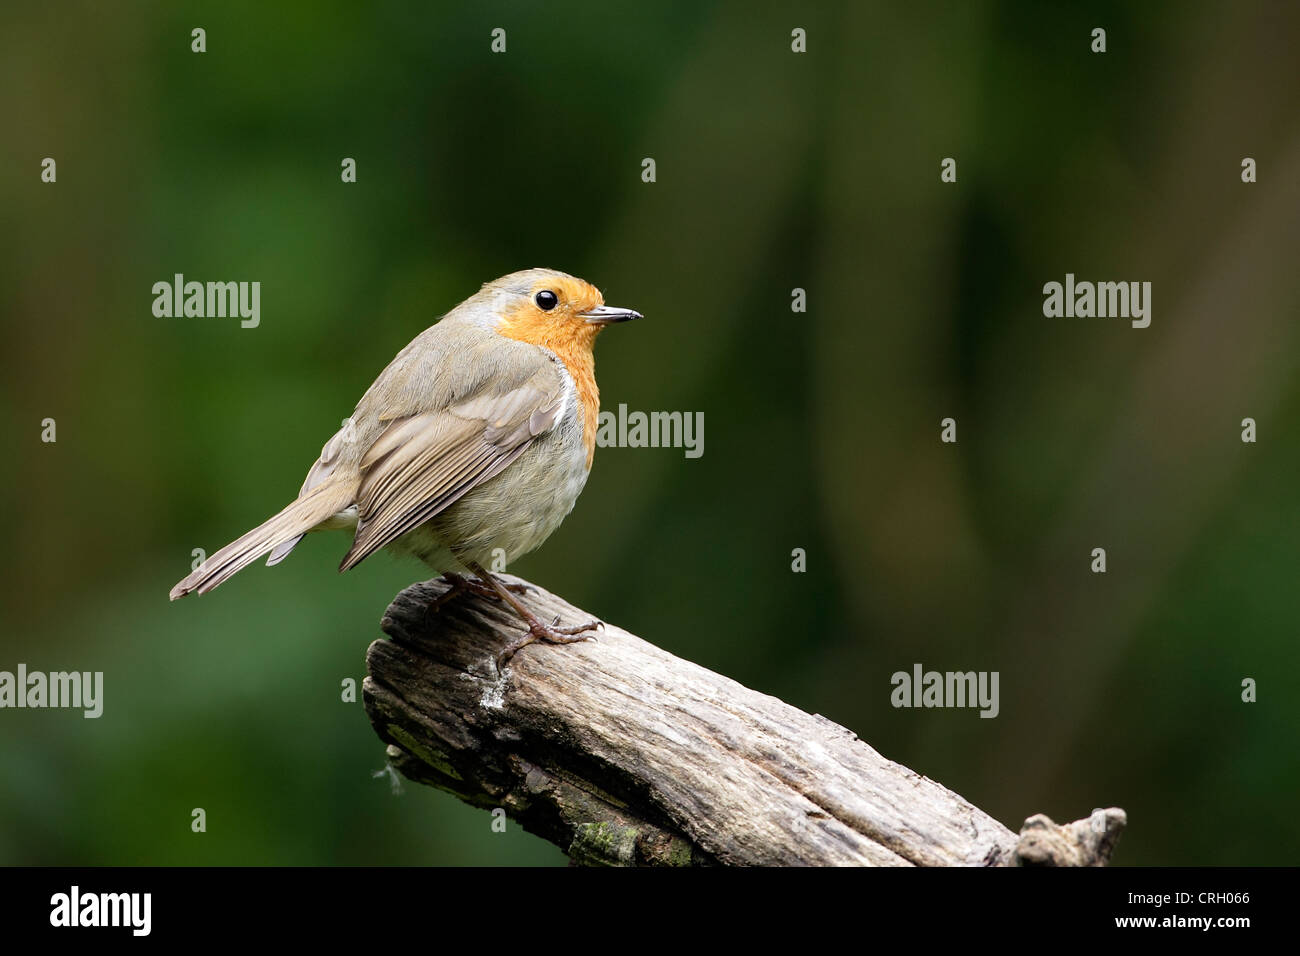 A Robin (Erithacus rubecula) perched alertly on a tree stump. Stock Photo